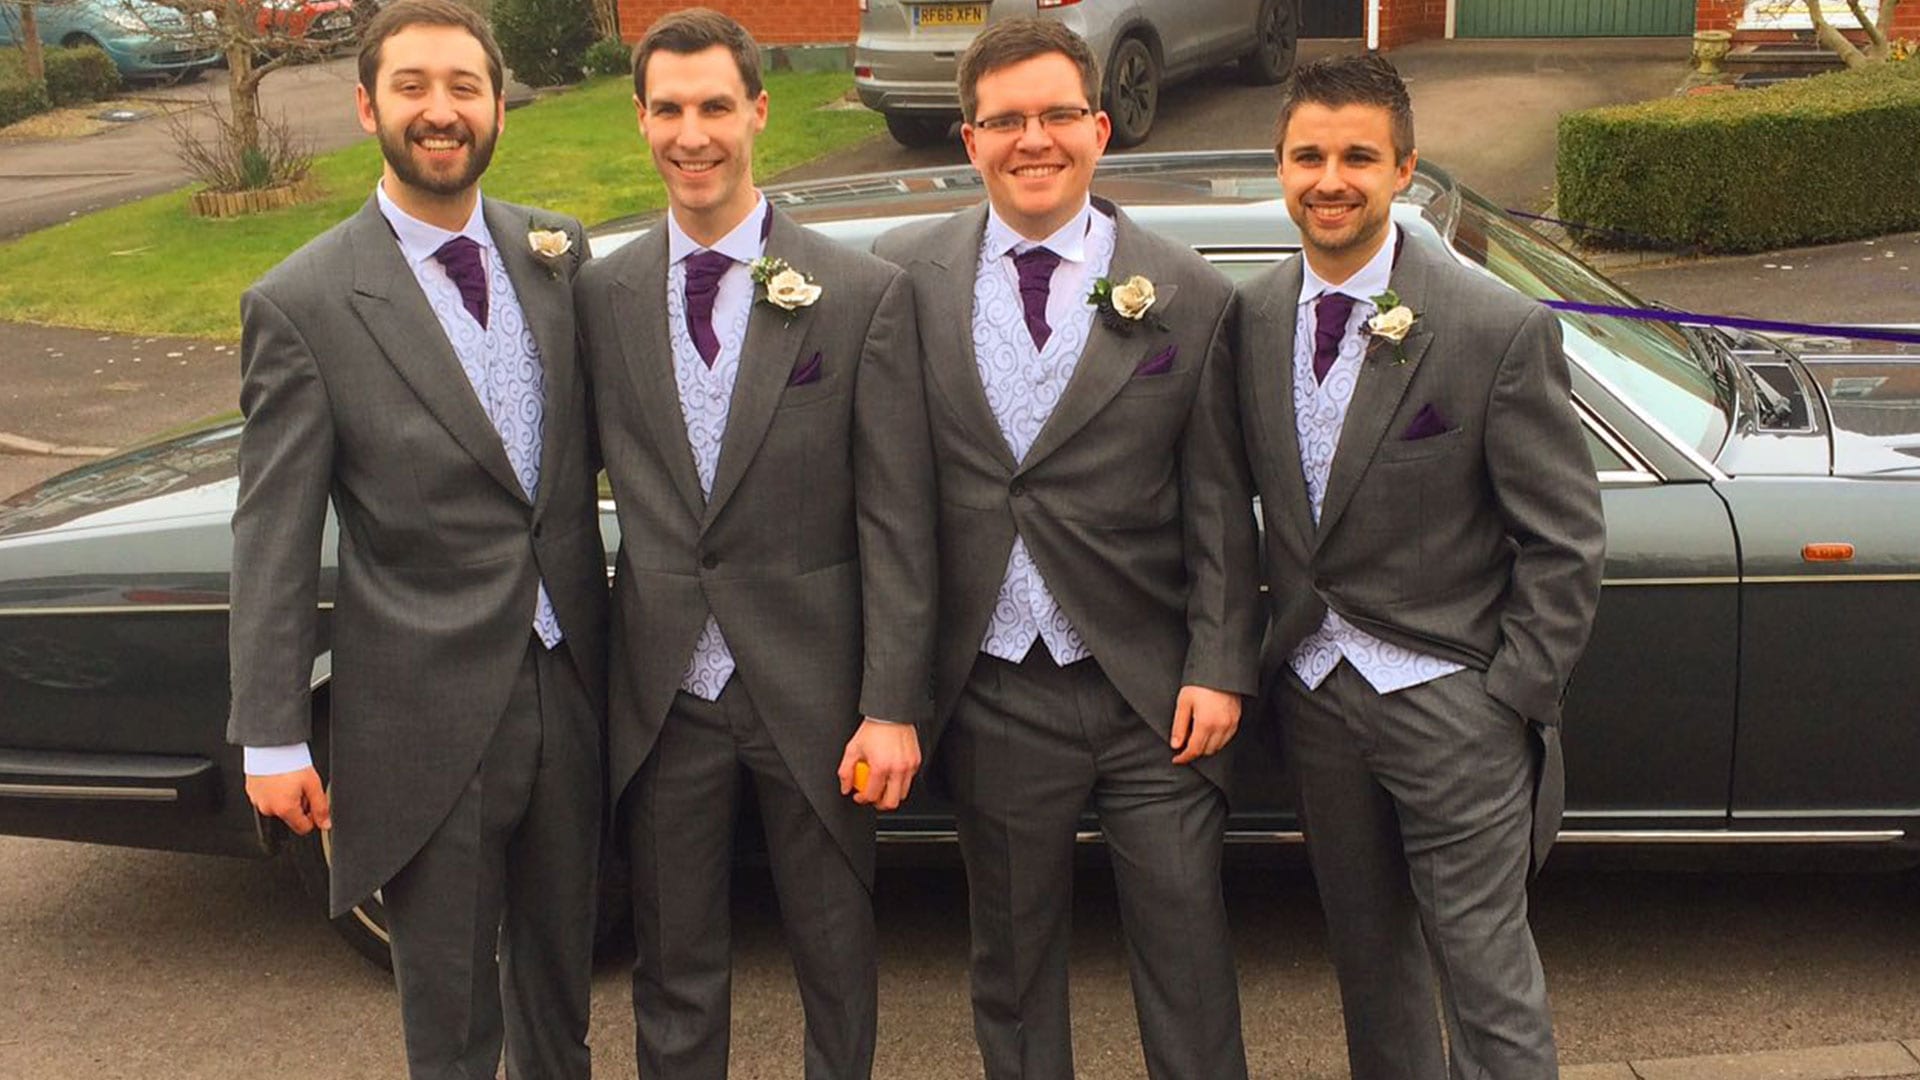 The Groom and his Groomsmen with the Rolls-Royce Flying Spur